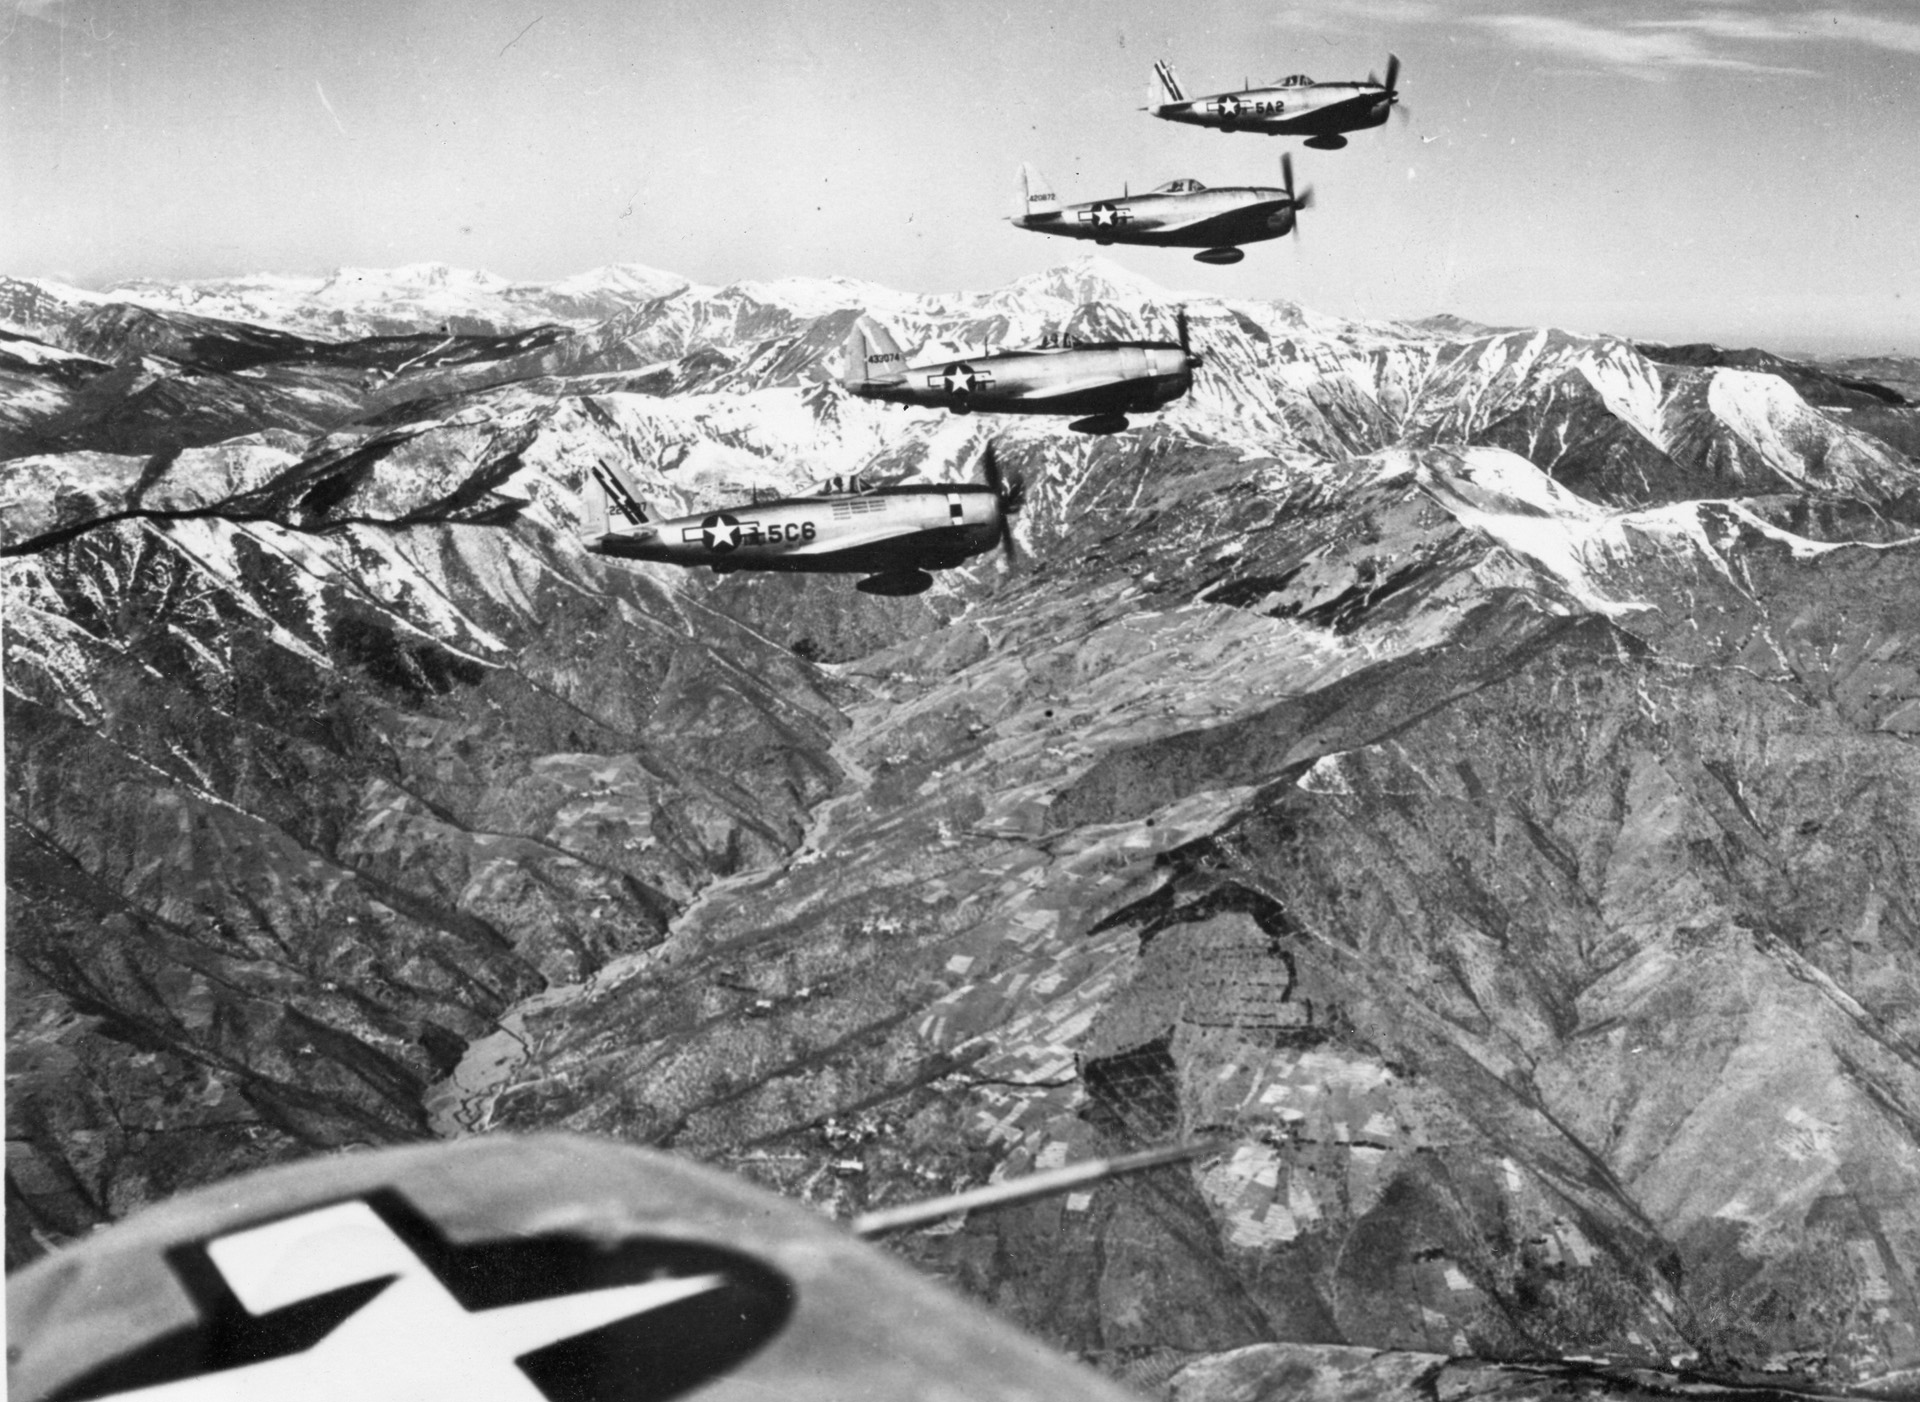 P-47 Thunderbolt fighter bombers with belly fuel tanks en route to an attack in Italy’s Northern Apennine Mountains, April 1945. OPPOSITE: P-47s, escorting a B-25 with a damaged engine returning from a 